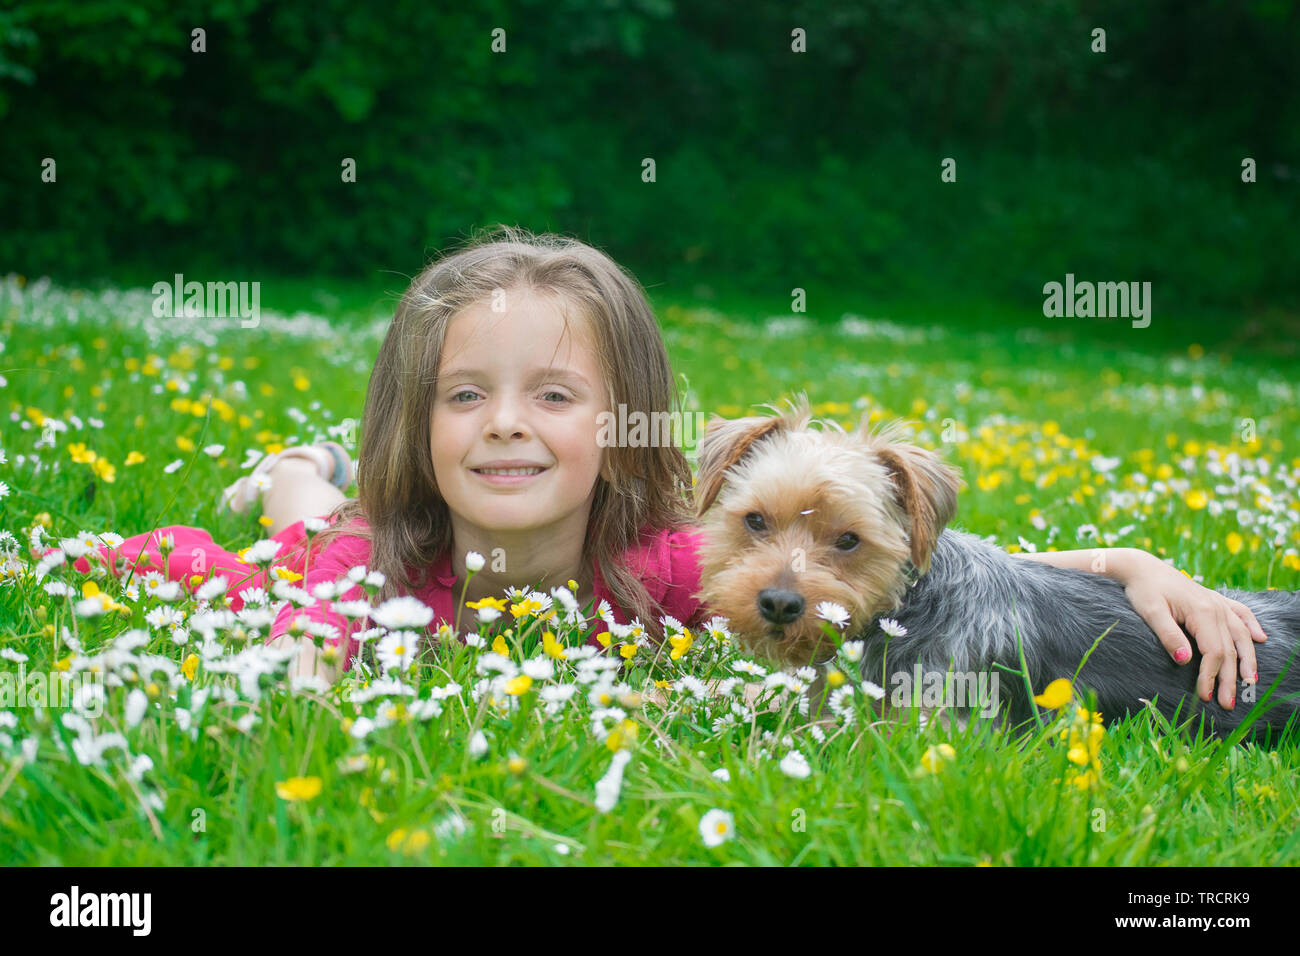 Little girl and pet dog laying in a field of daisies in the park. Stock Photo